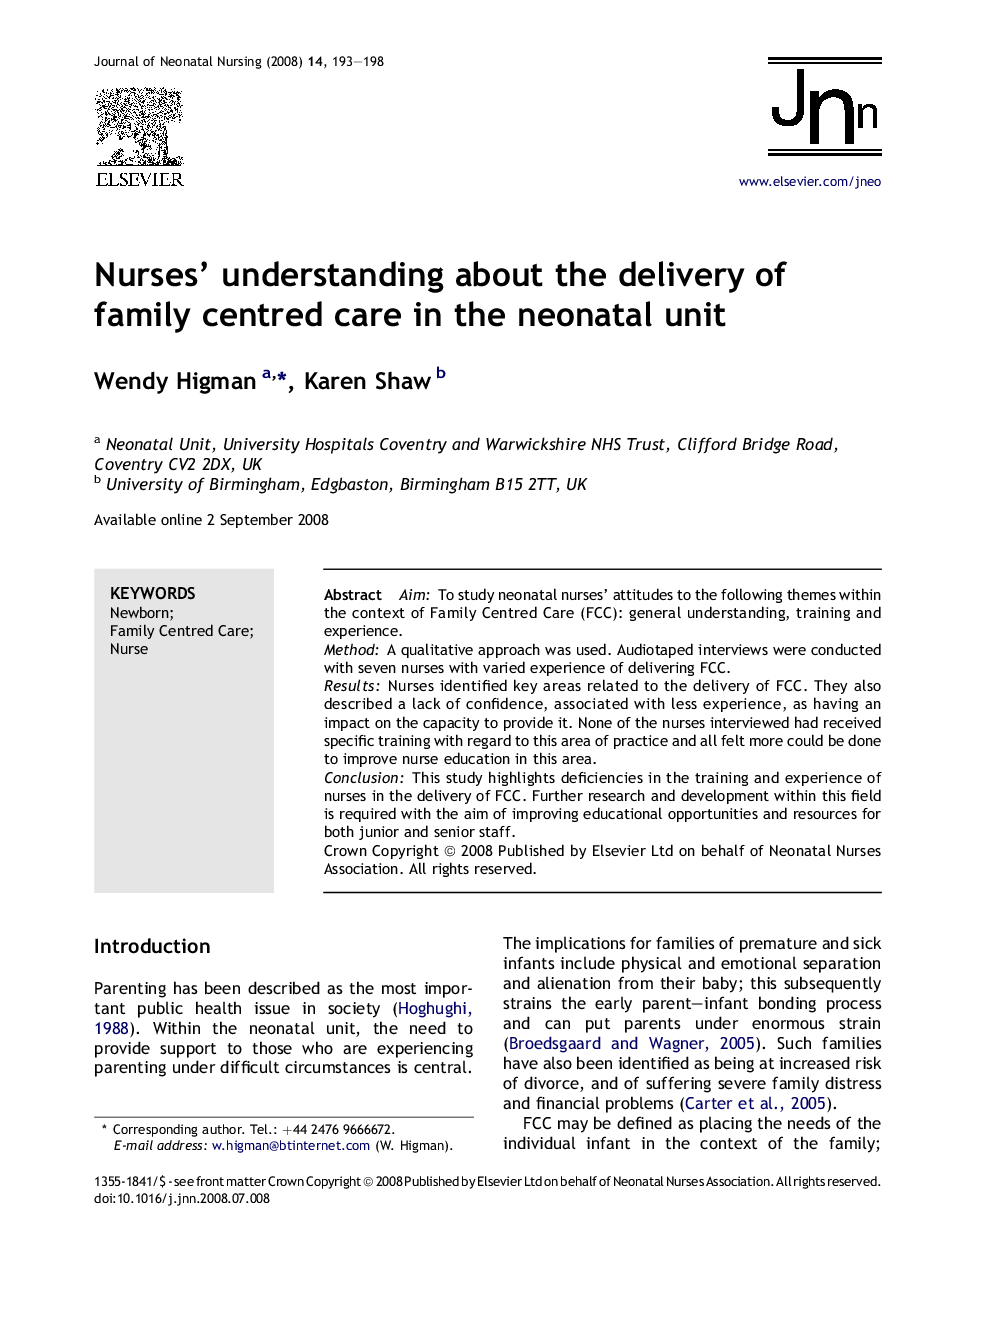 Nurses' understanding about the delivery of family centred care in the neonatal unit